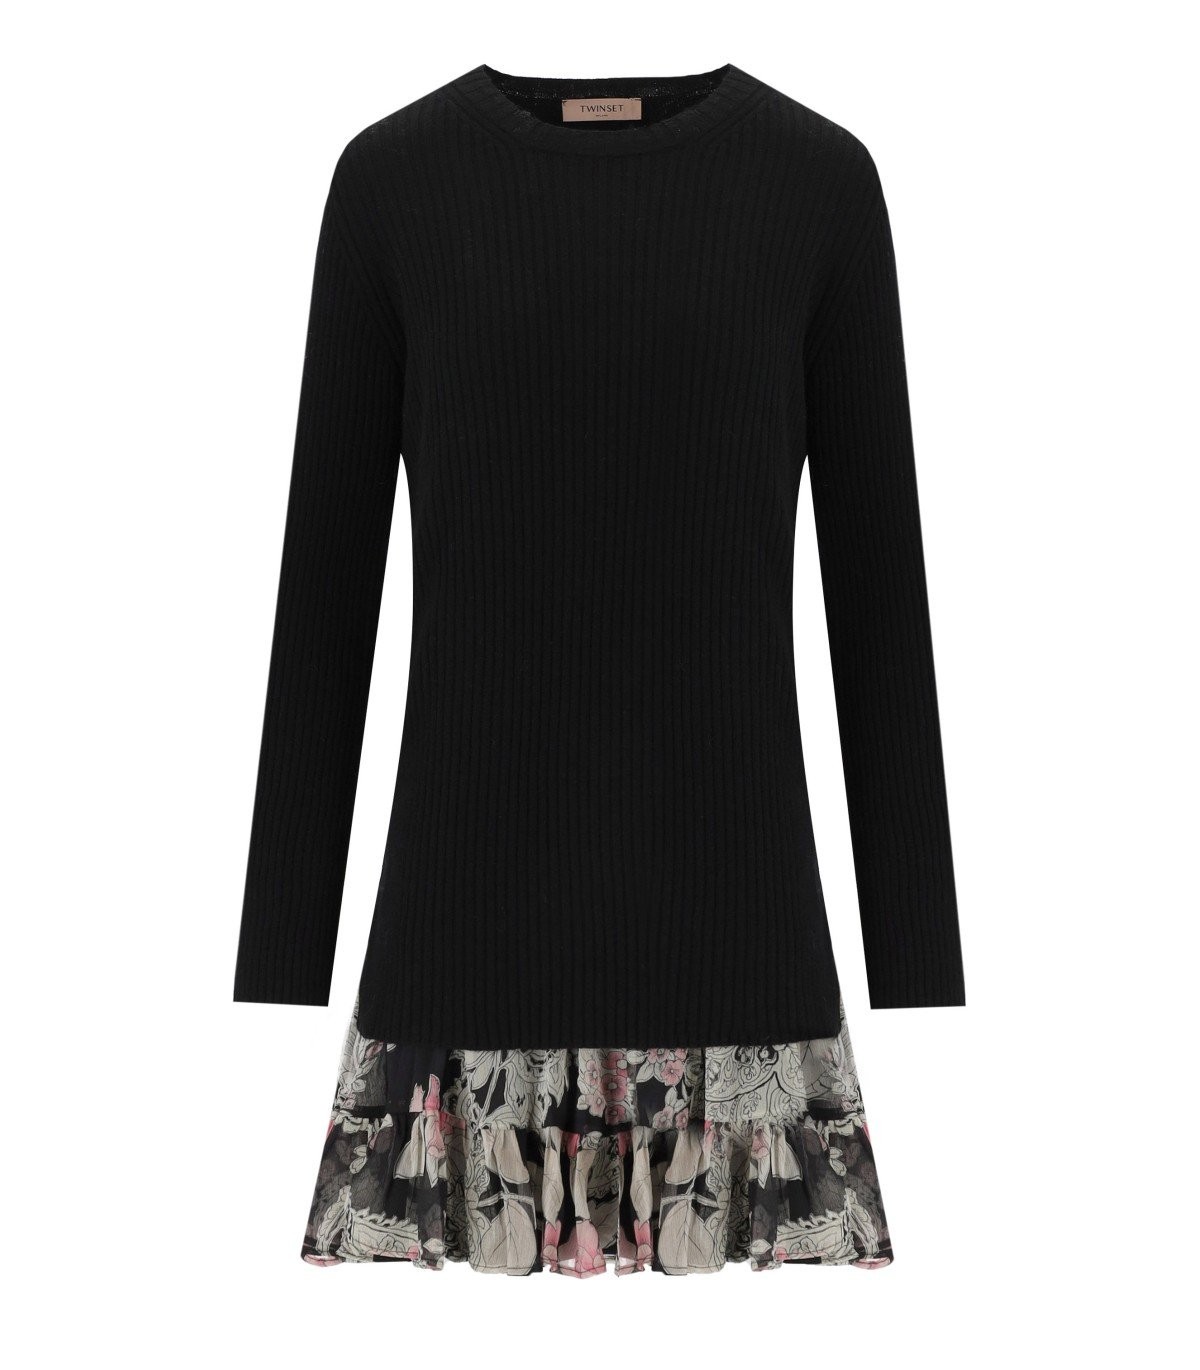 TWINSET CACHEMIRE AND ROSE BLACK KNITTED DRESS